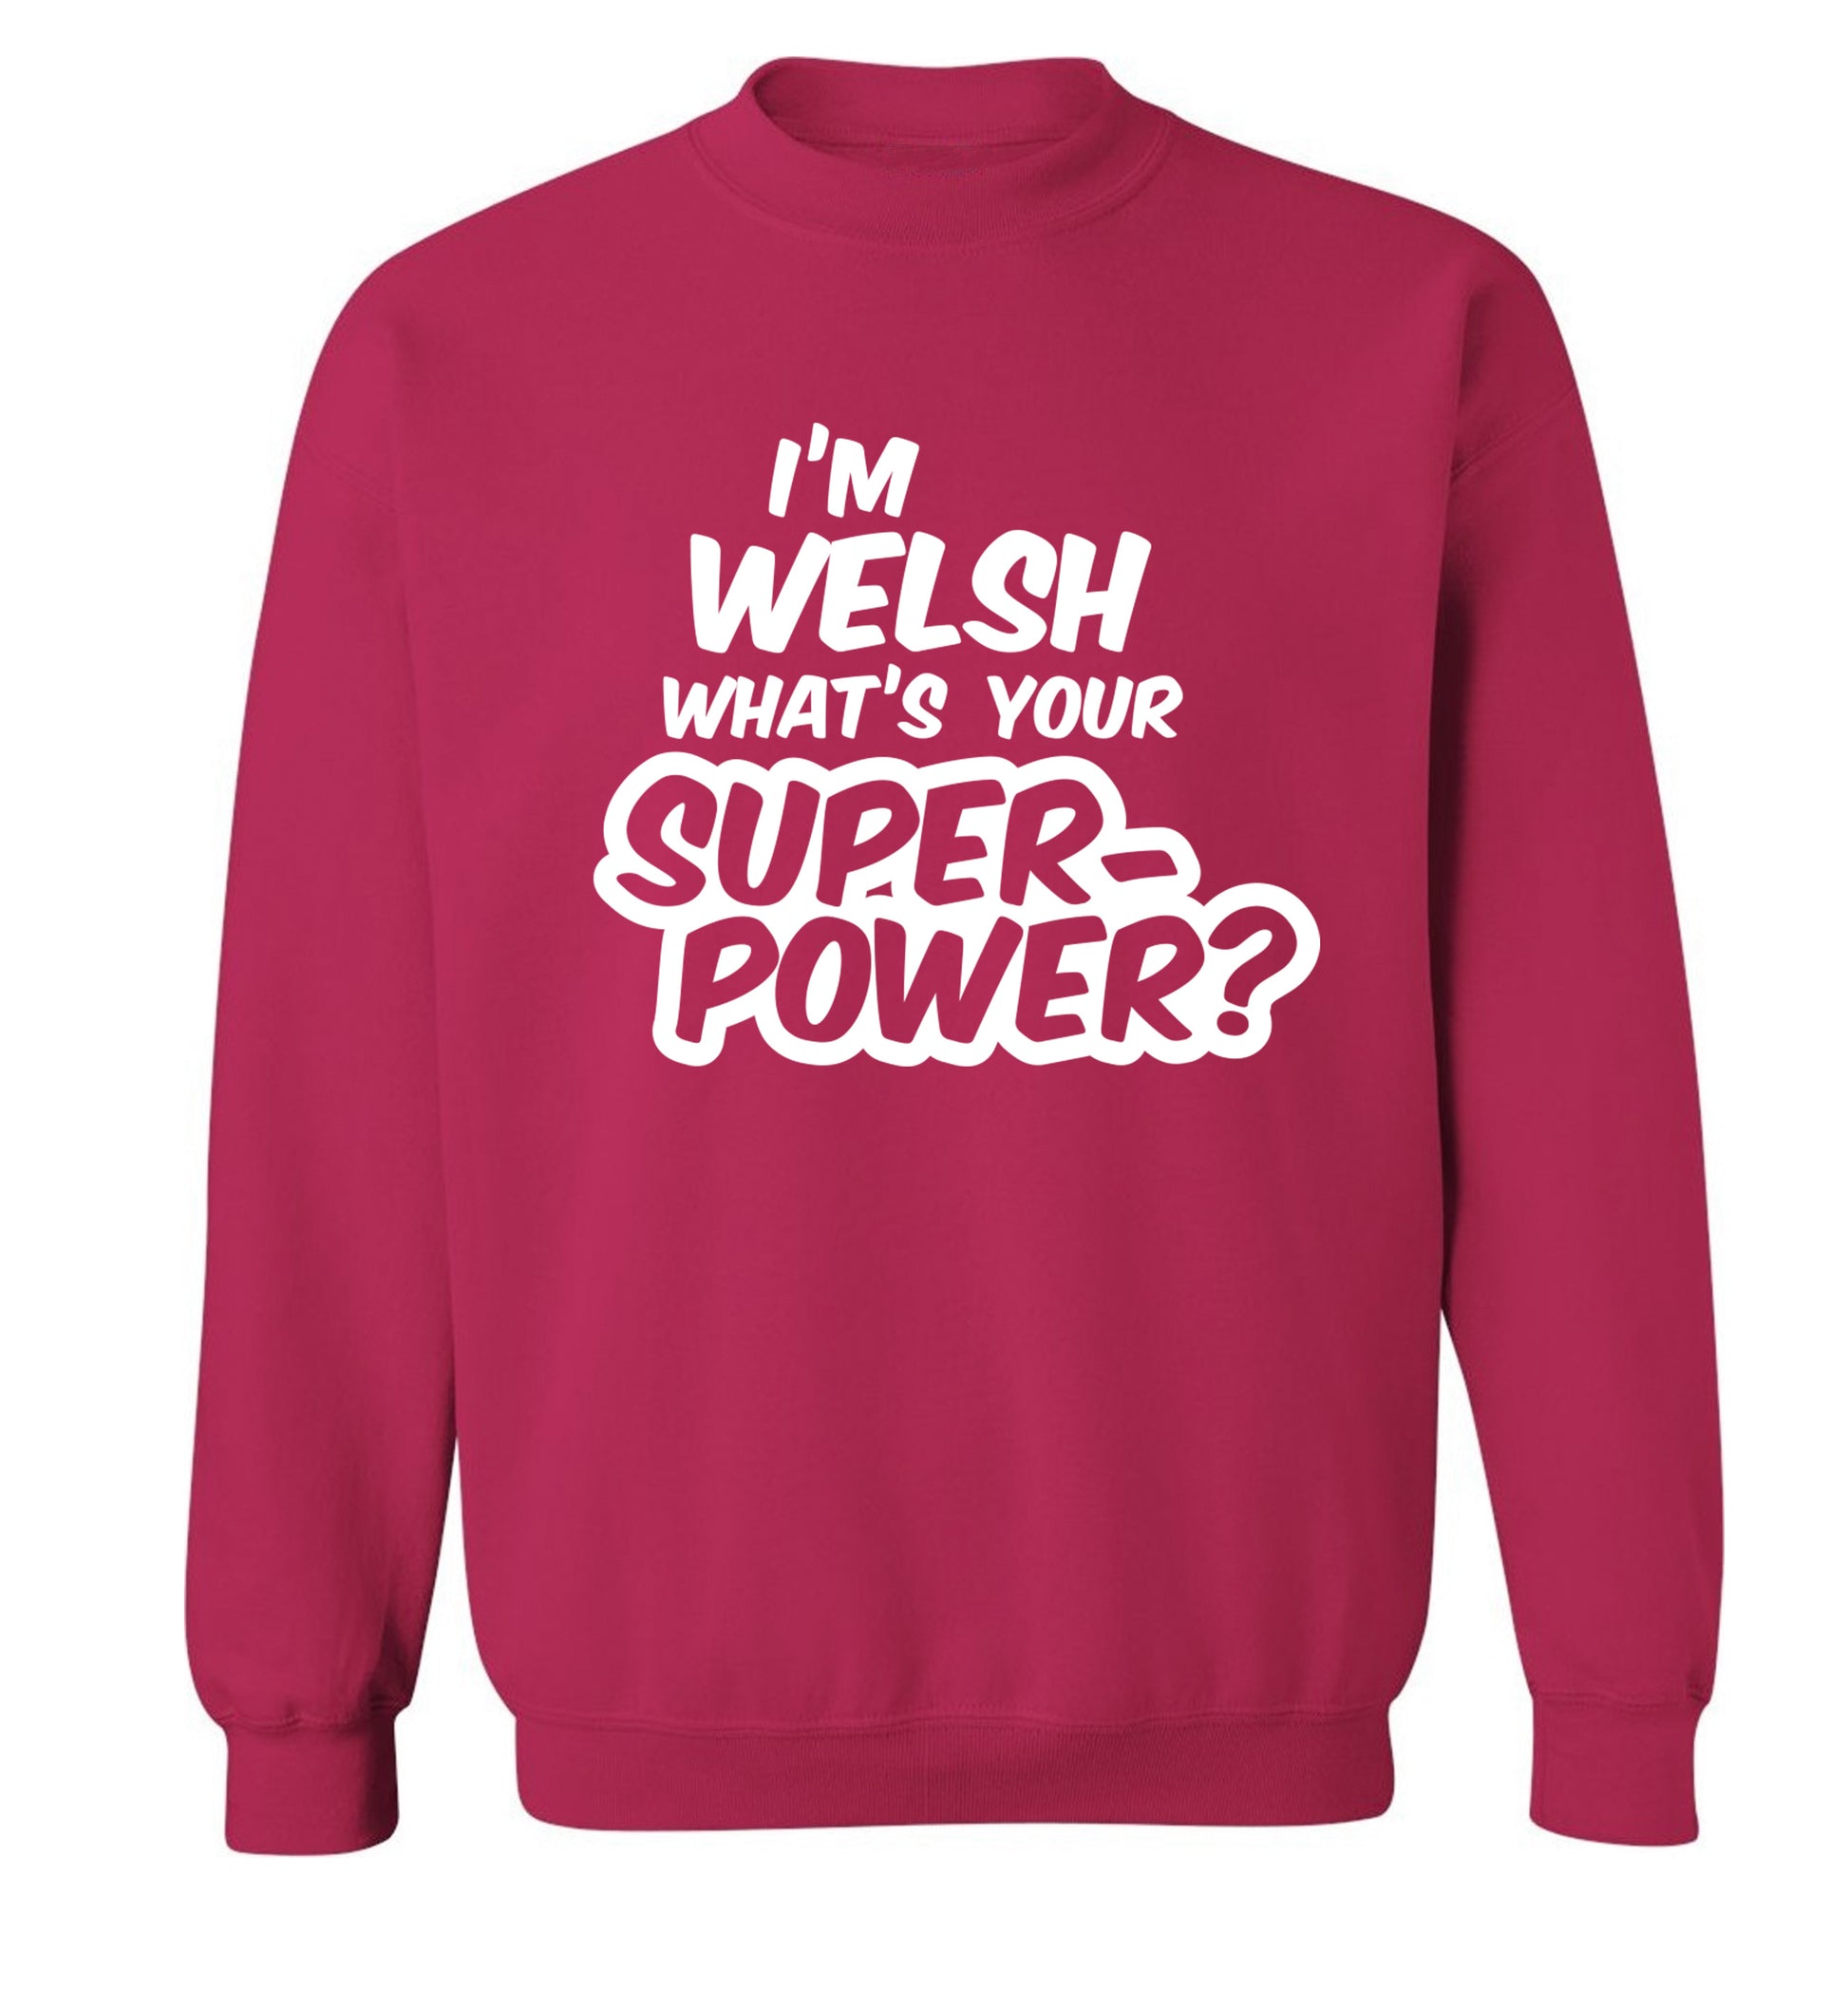 I'm Welsh what's your superpower? Adult's unisex pink Sweater 2XL